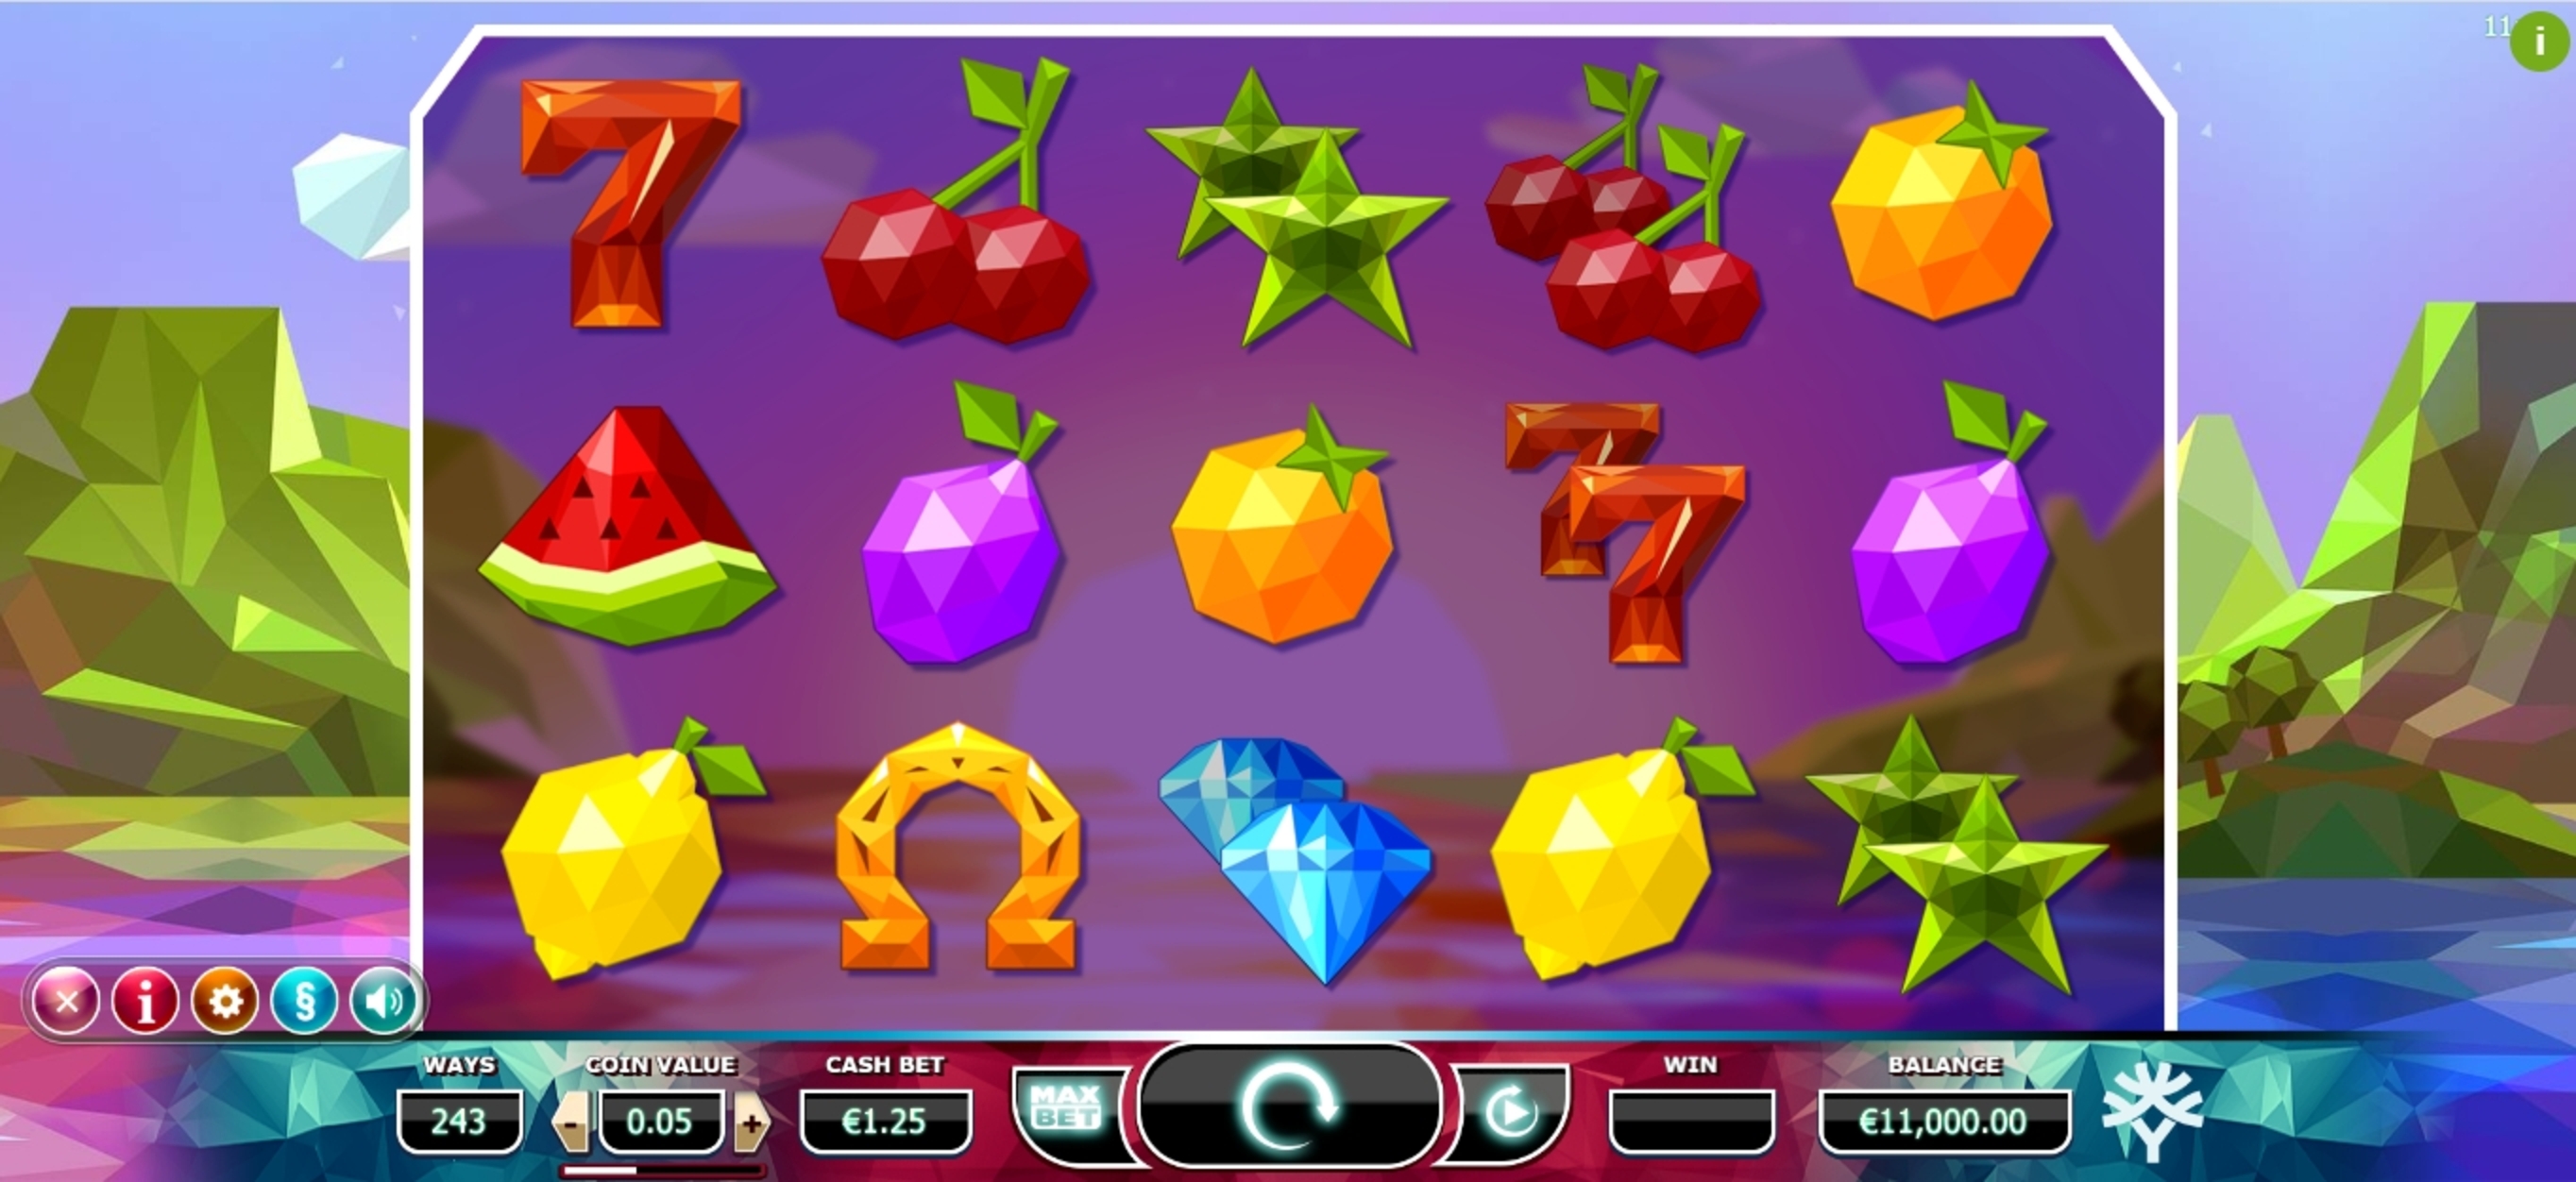 Reels in Doubles Slot Game by Yggdrasil Gaming